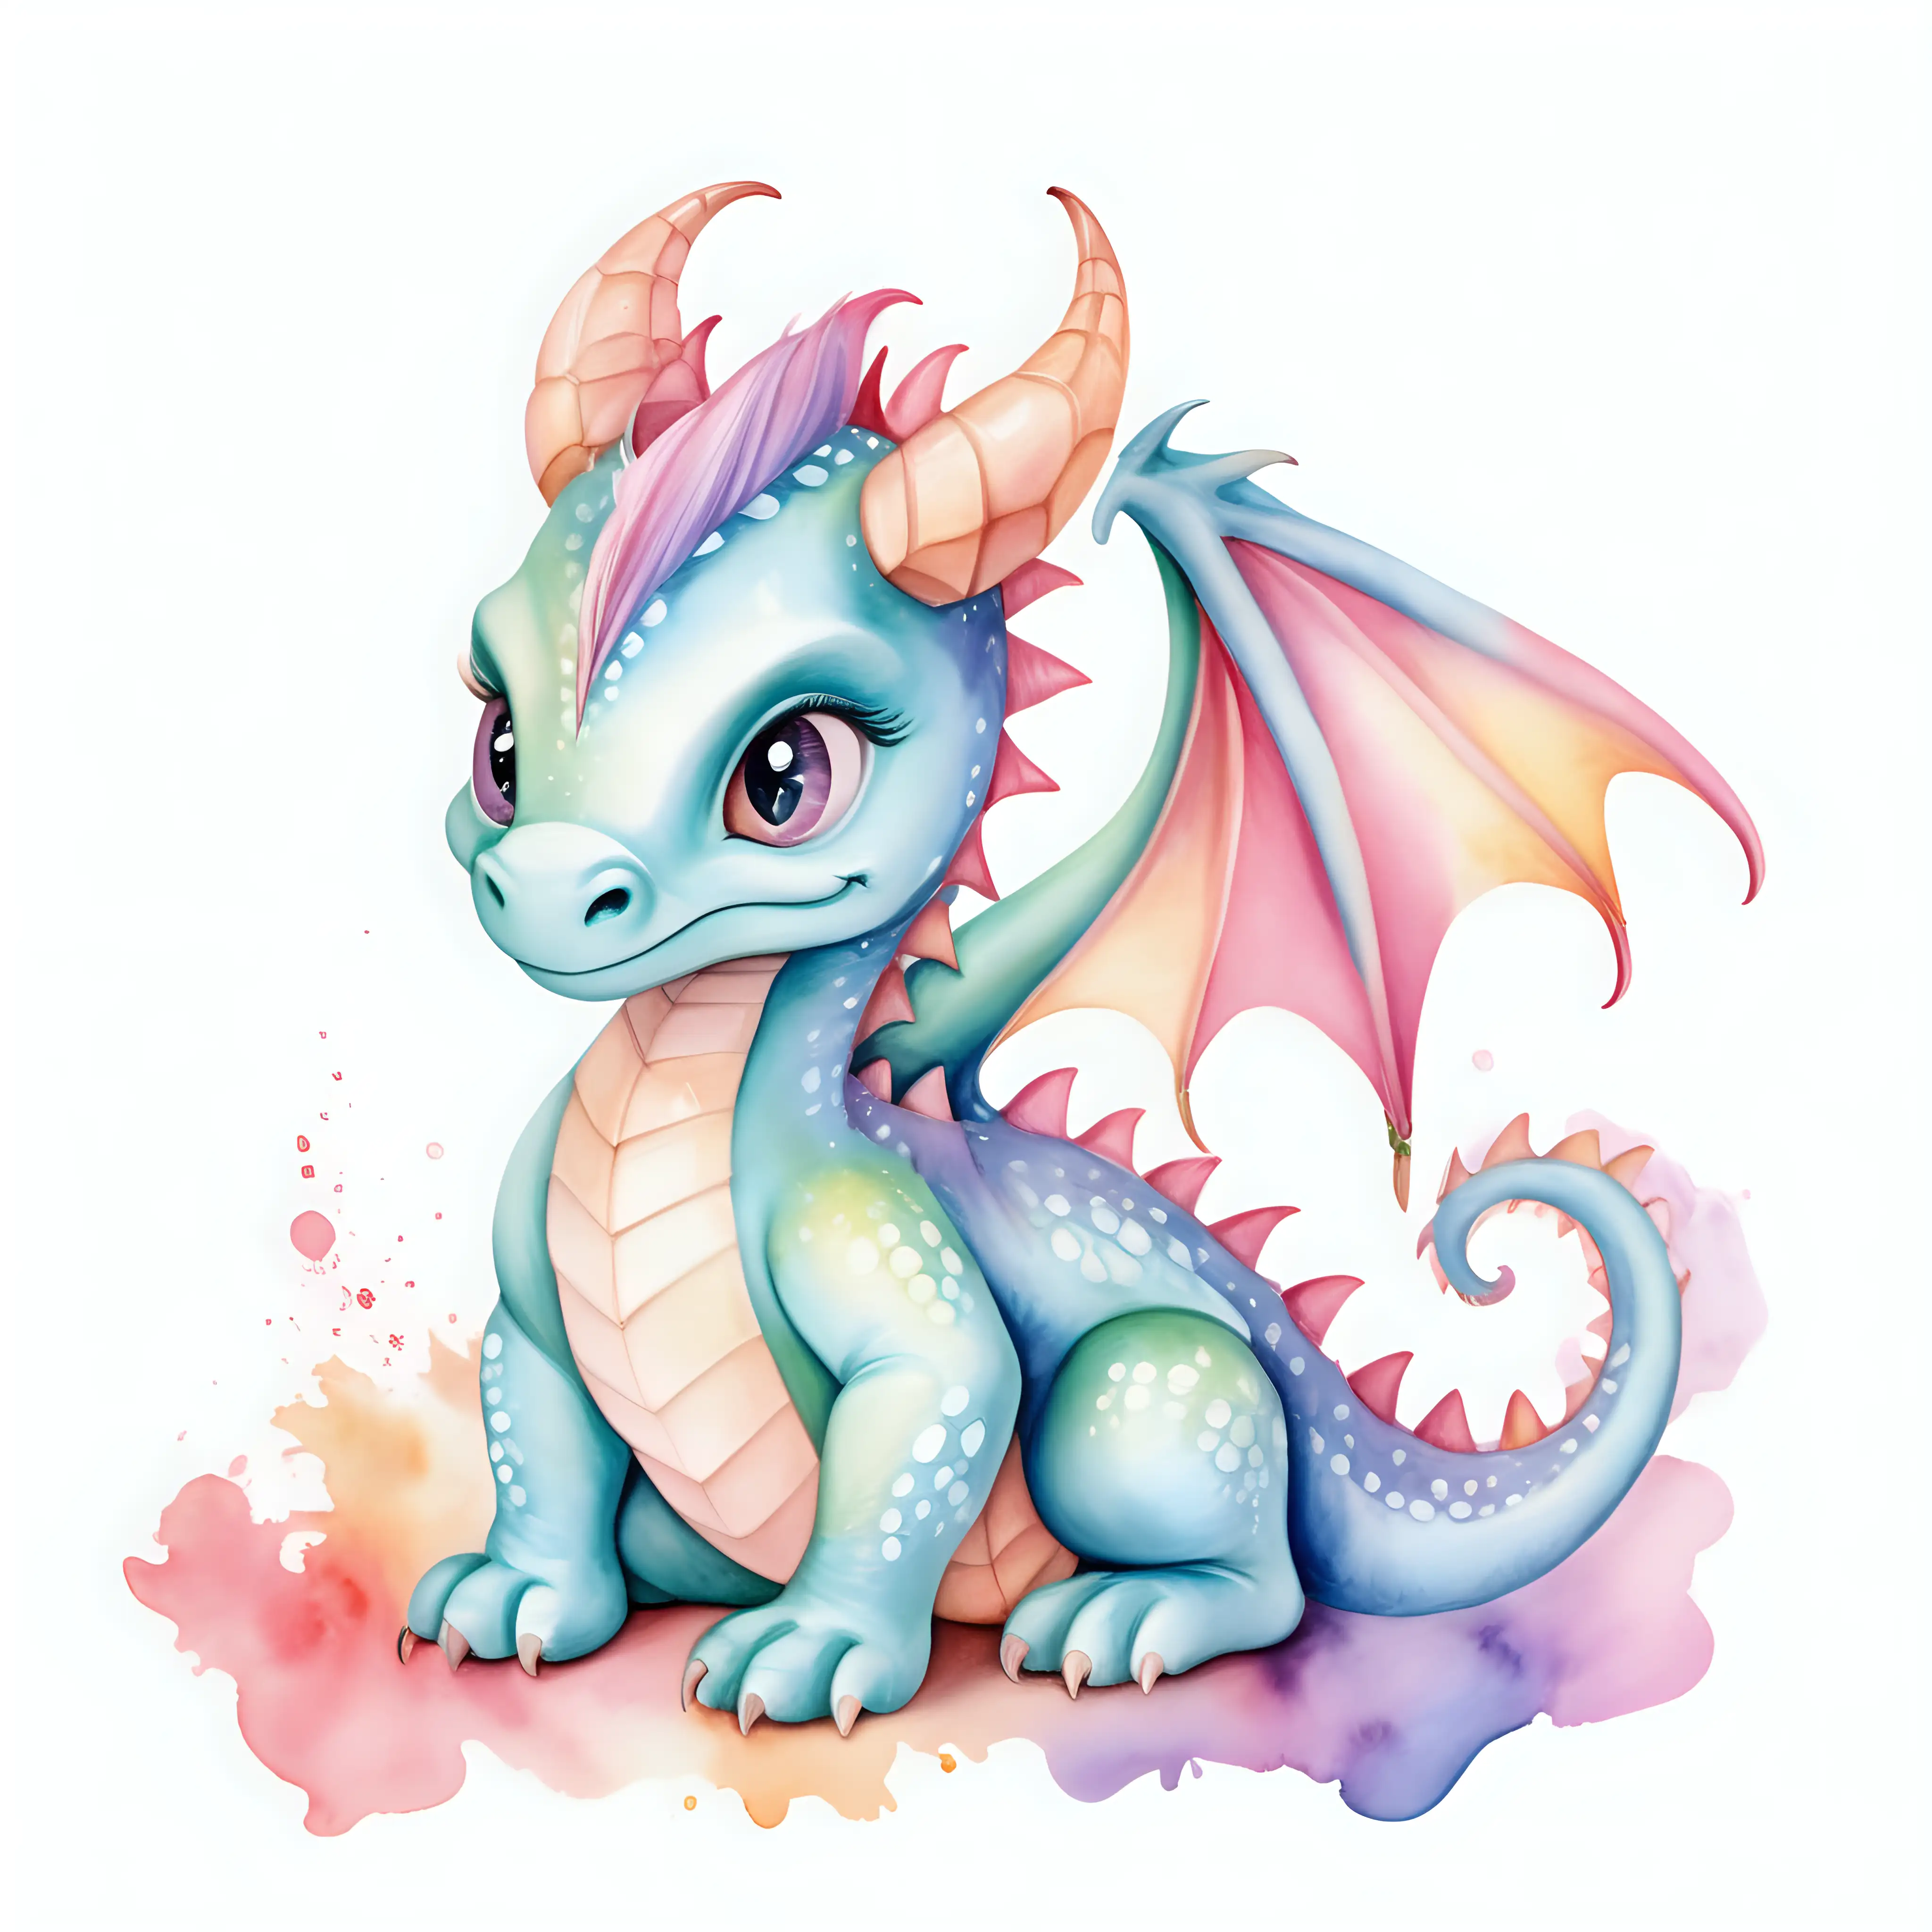 Pastel Watercolor Baby Dragon Illustration on Clean White Background